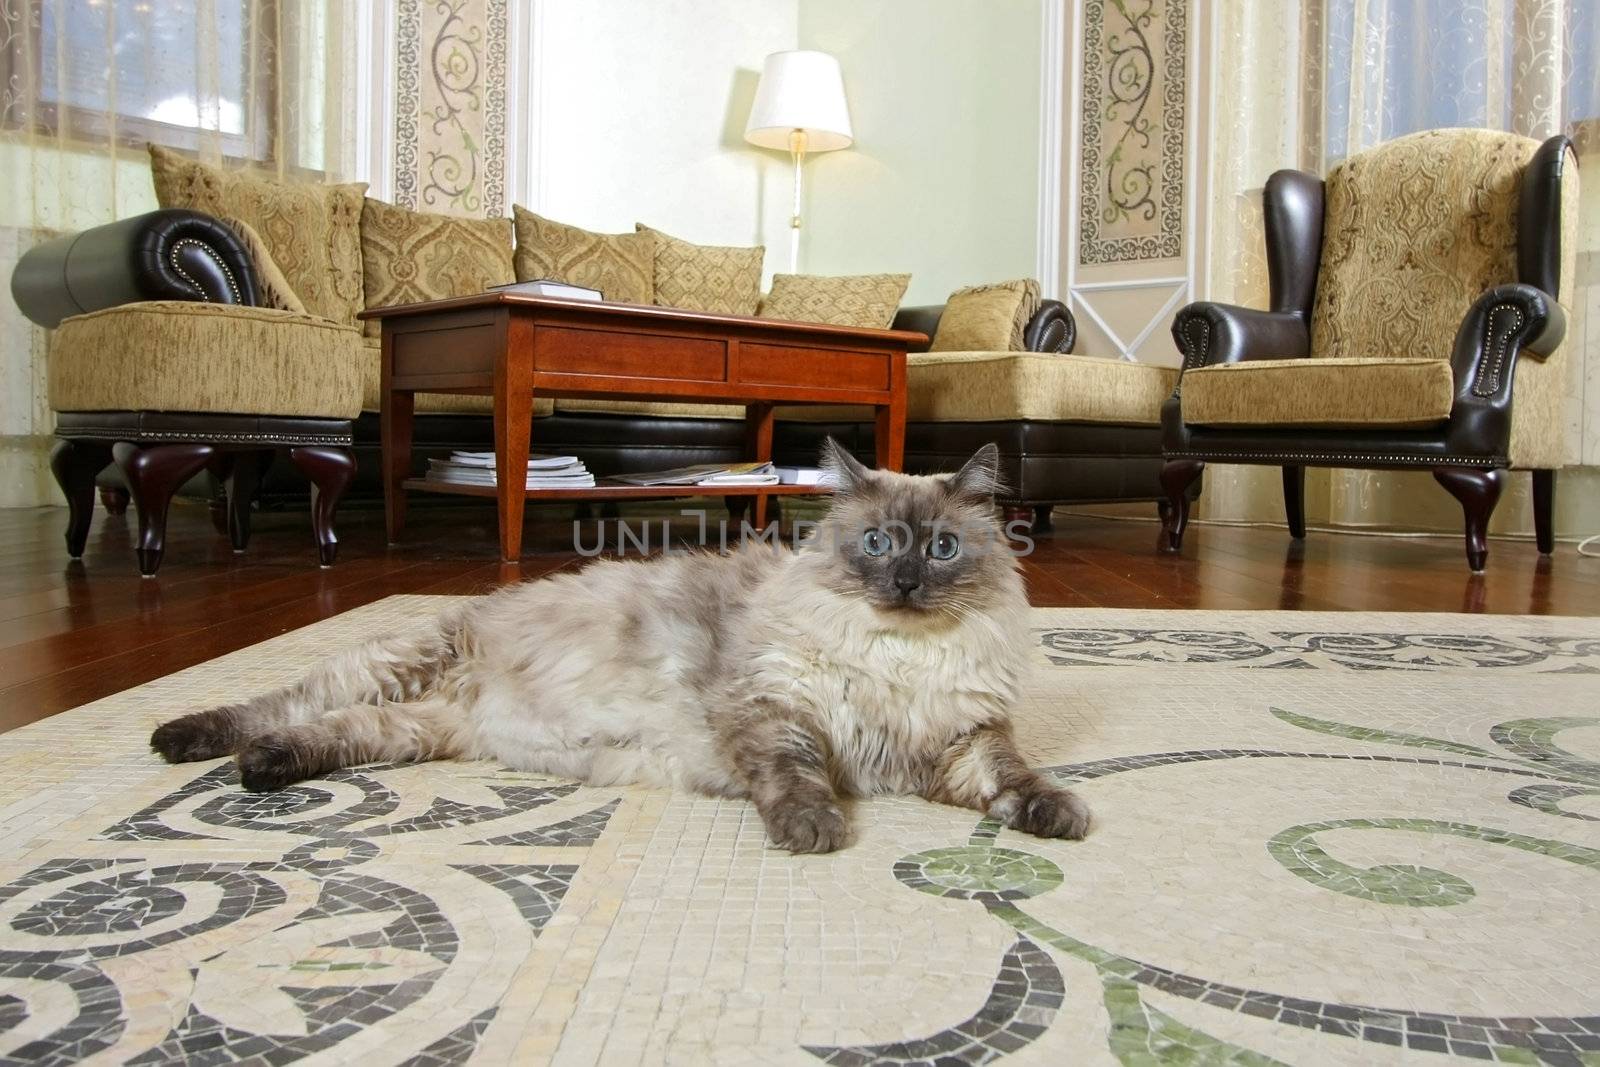 Spacious hall with a beautiful mosaic ornament on a floor. On a floor the blue-eyed cat lies.